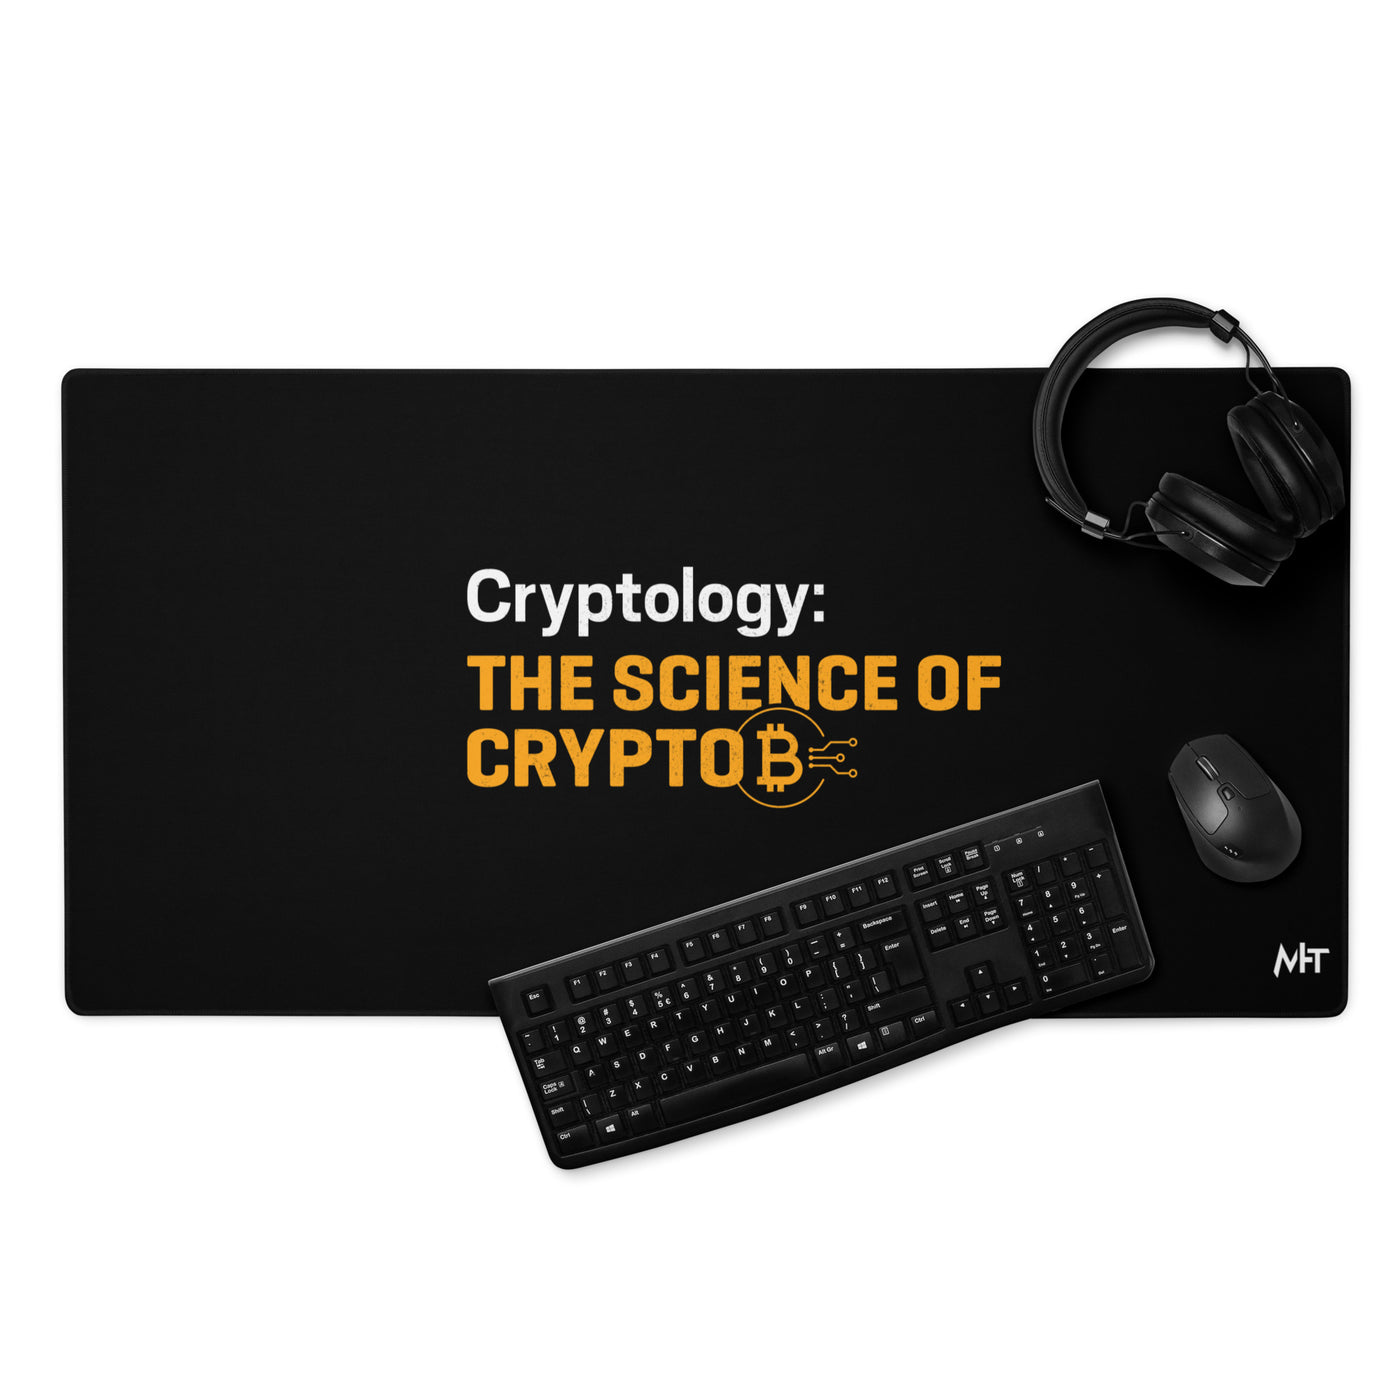 Cryptology: The Science of Crypto - Desk Mat